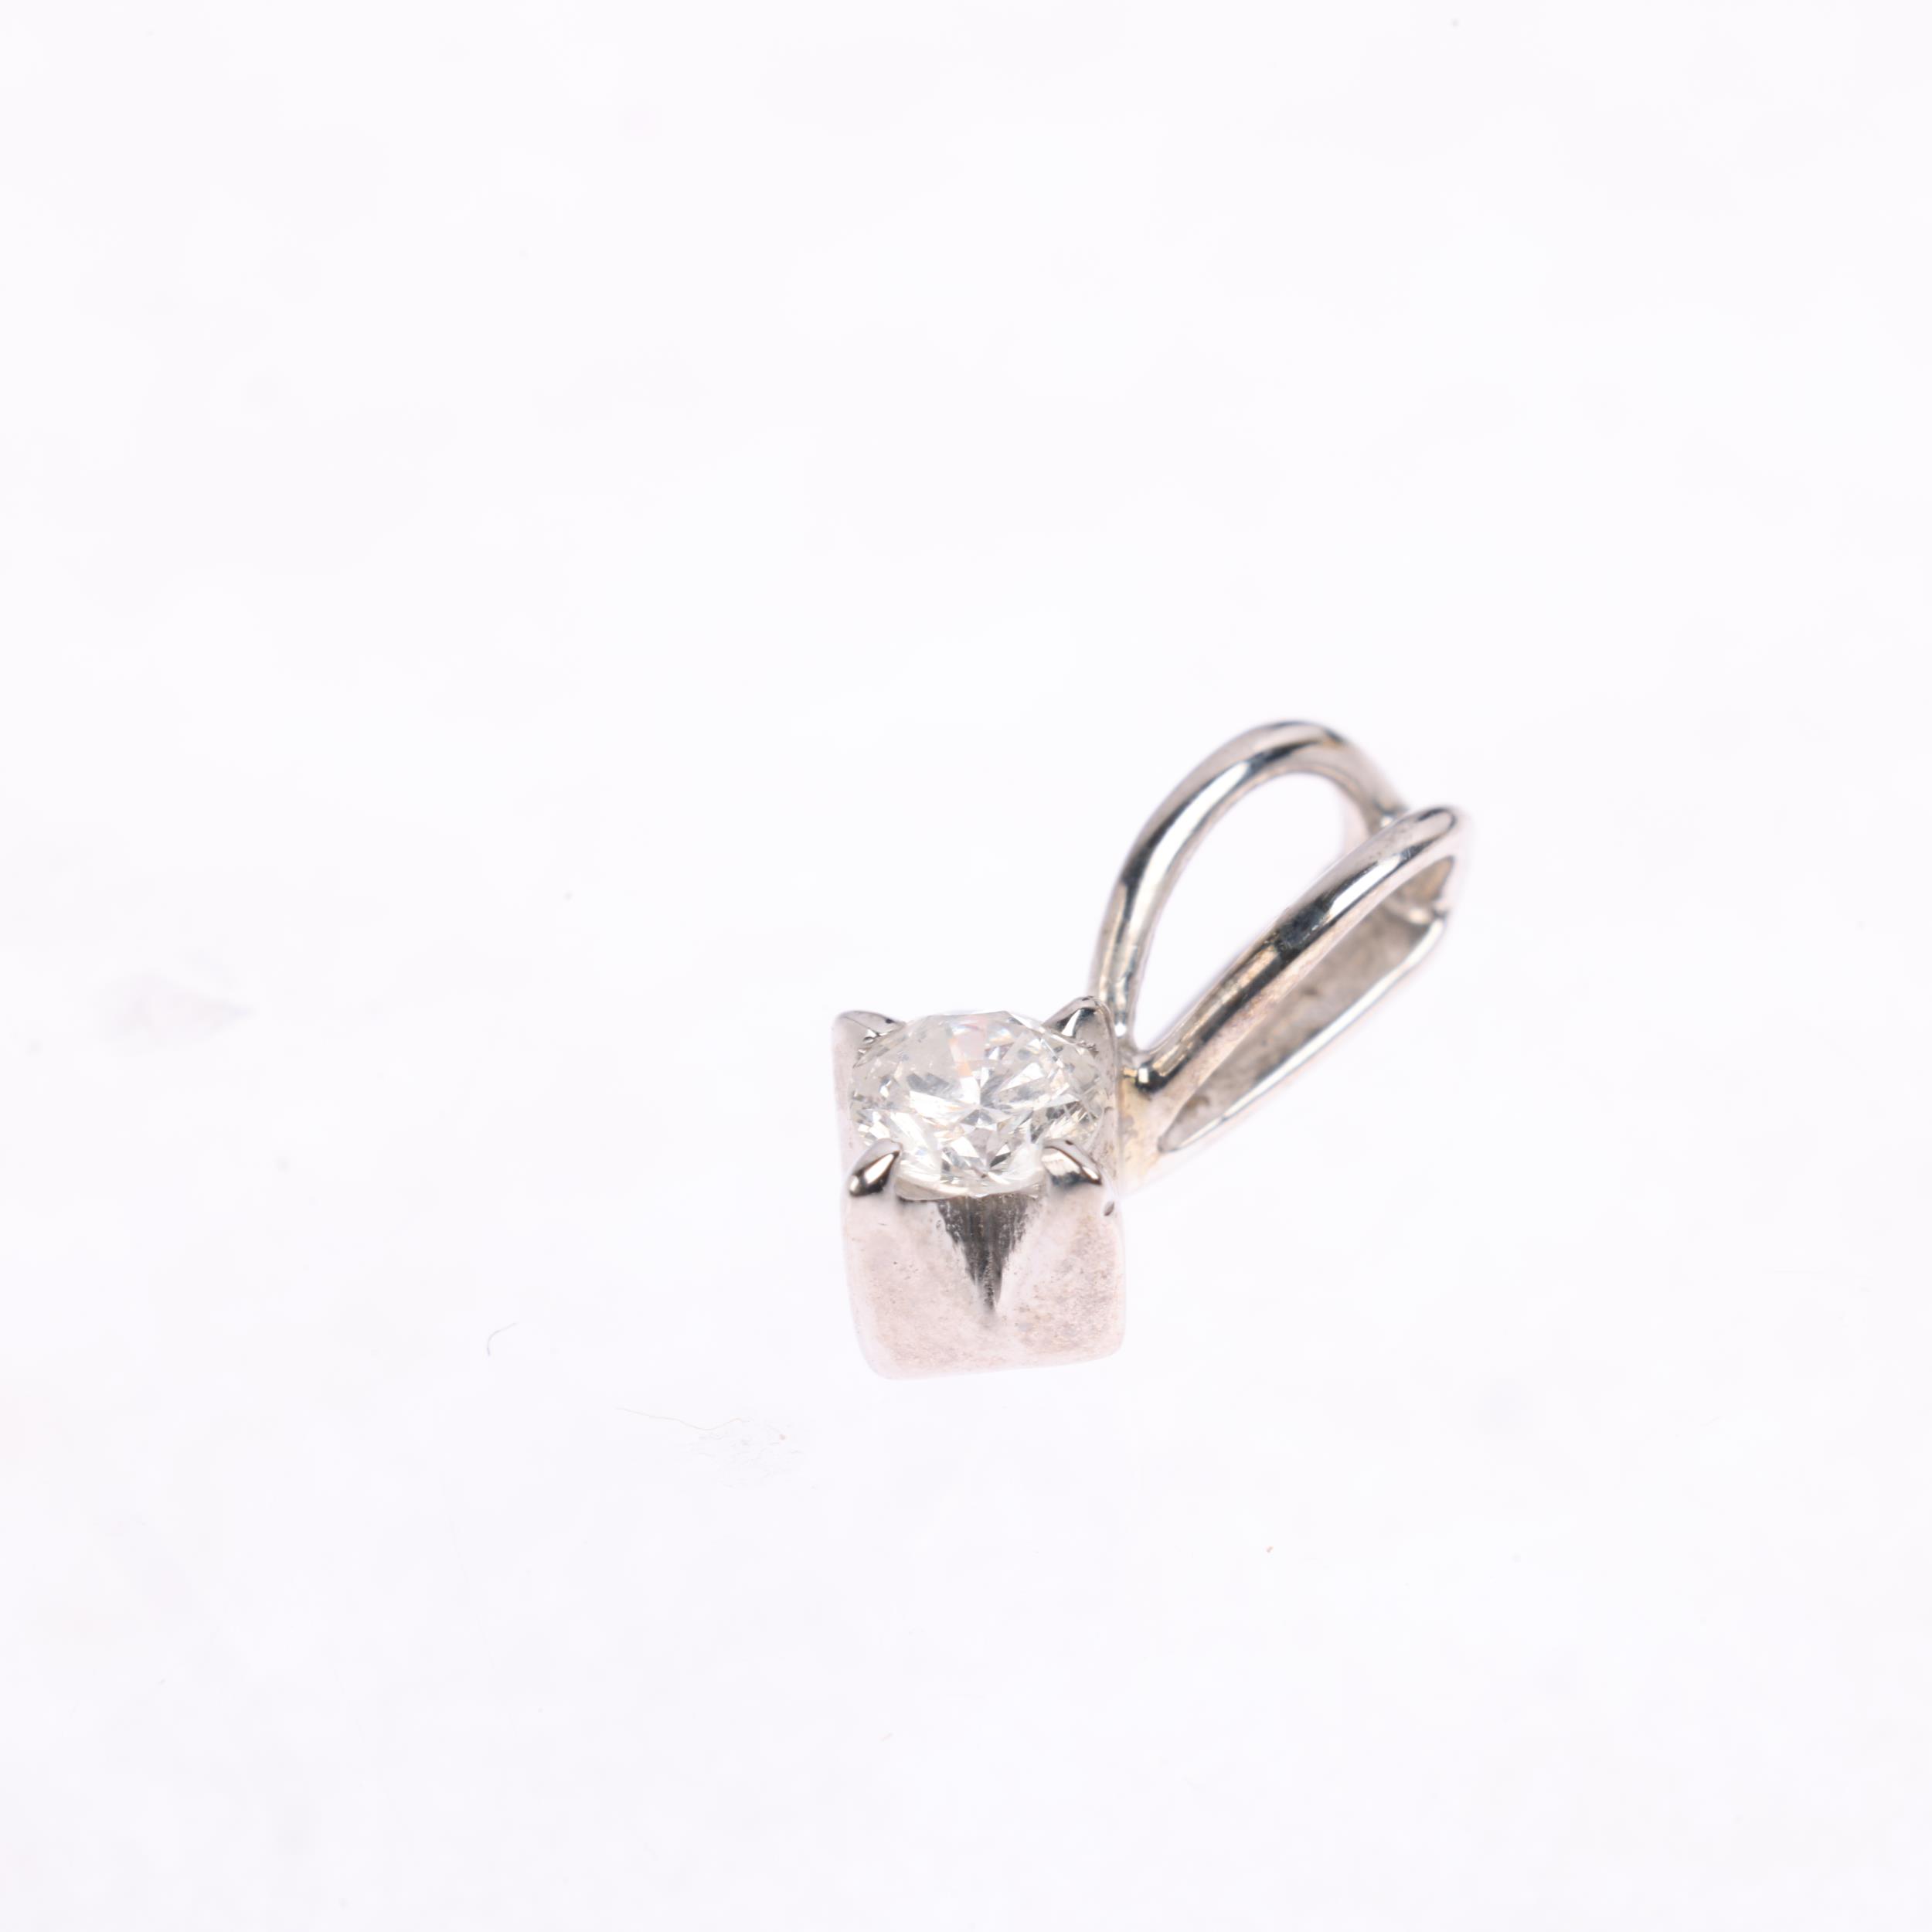 A 9ct white gold 0.15ct solitaire diamond pendant, claw set with modern round brilliant-cut diamond, - Image 2 of 4